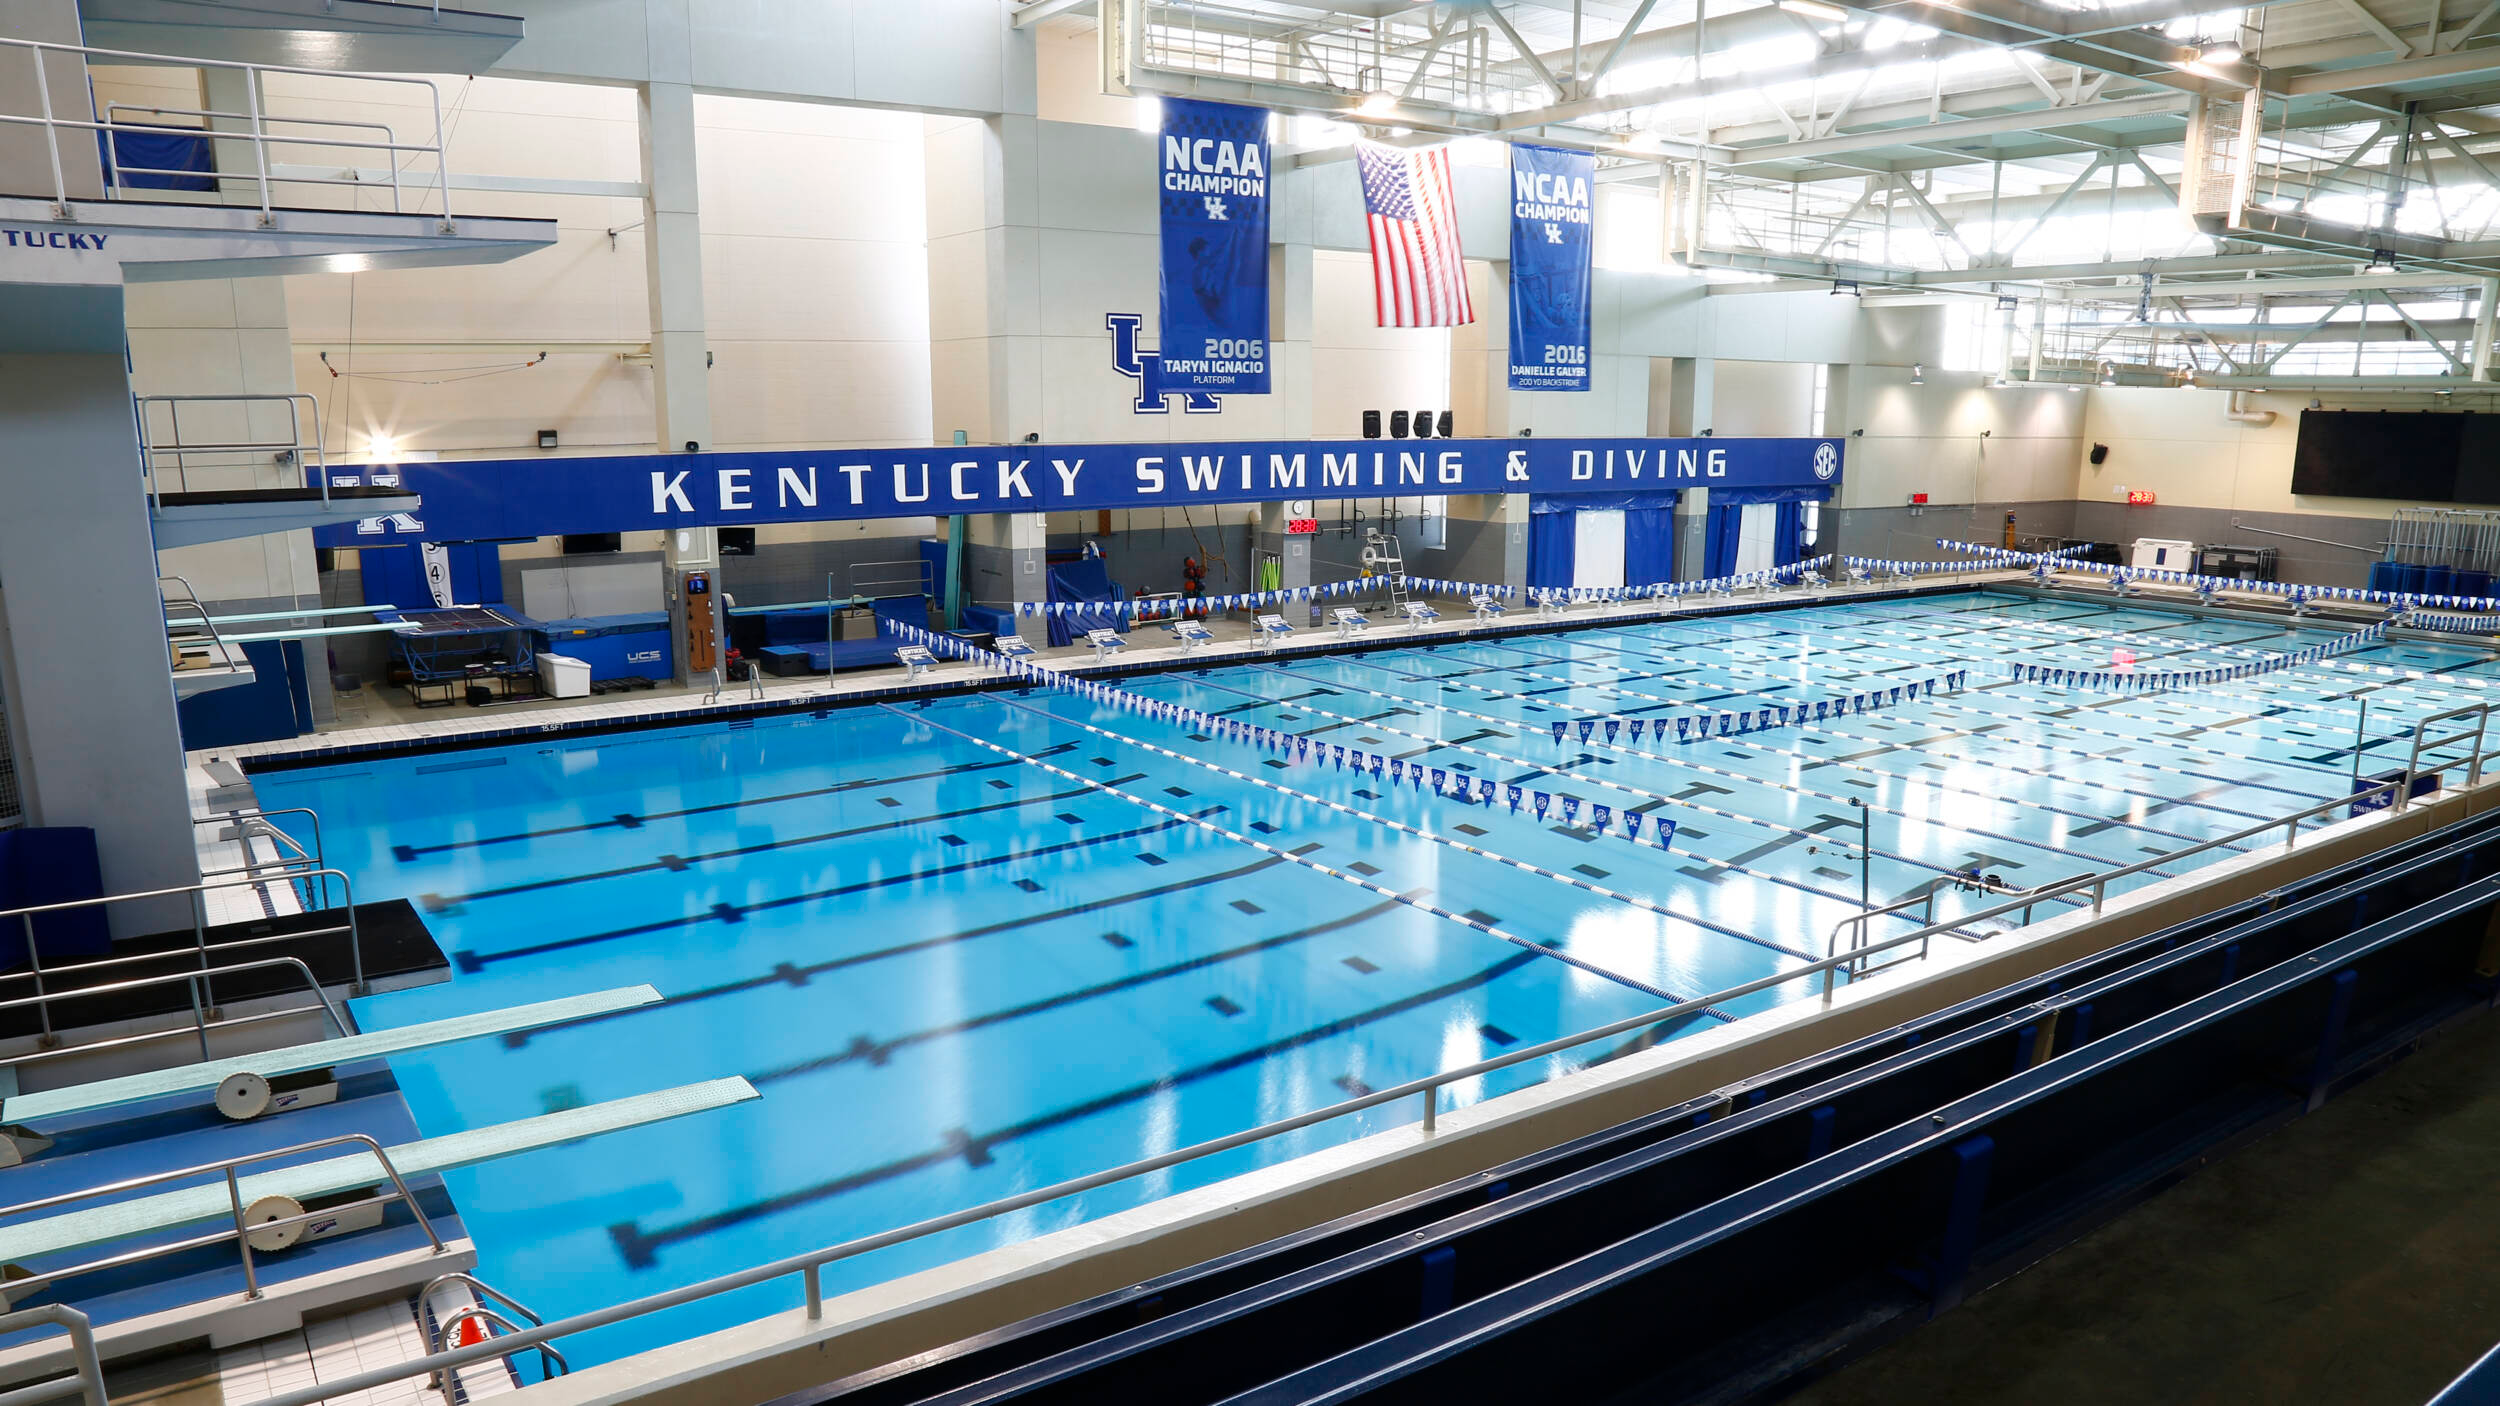 UK Women’s Swimming & Diving Team Announces Open Tryout Information